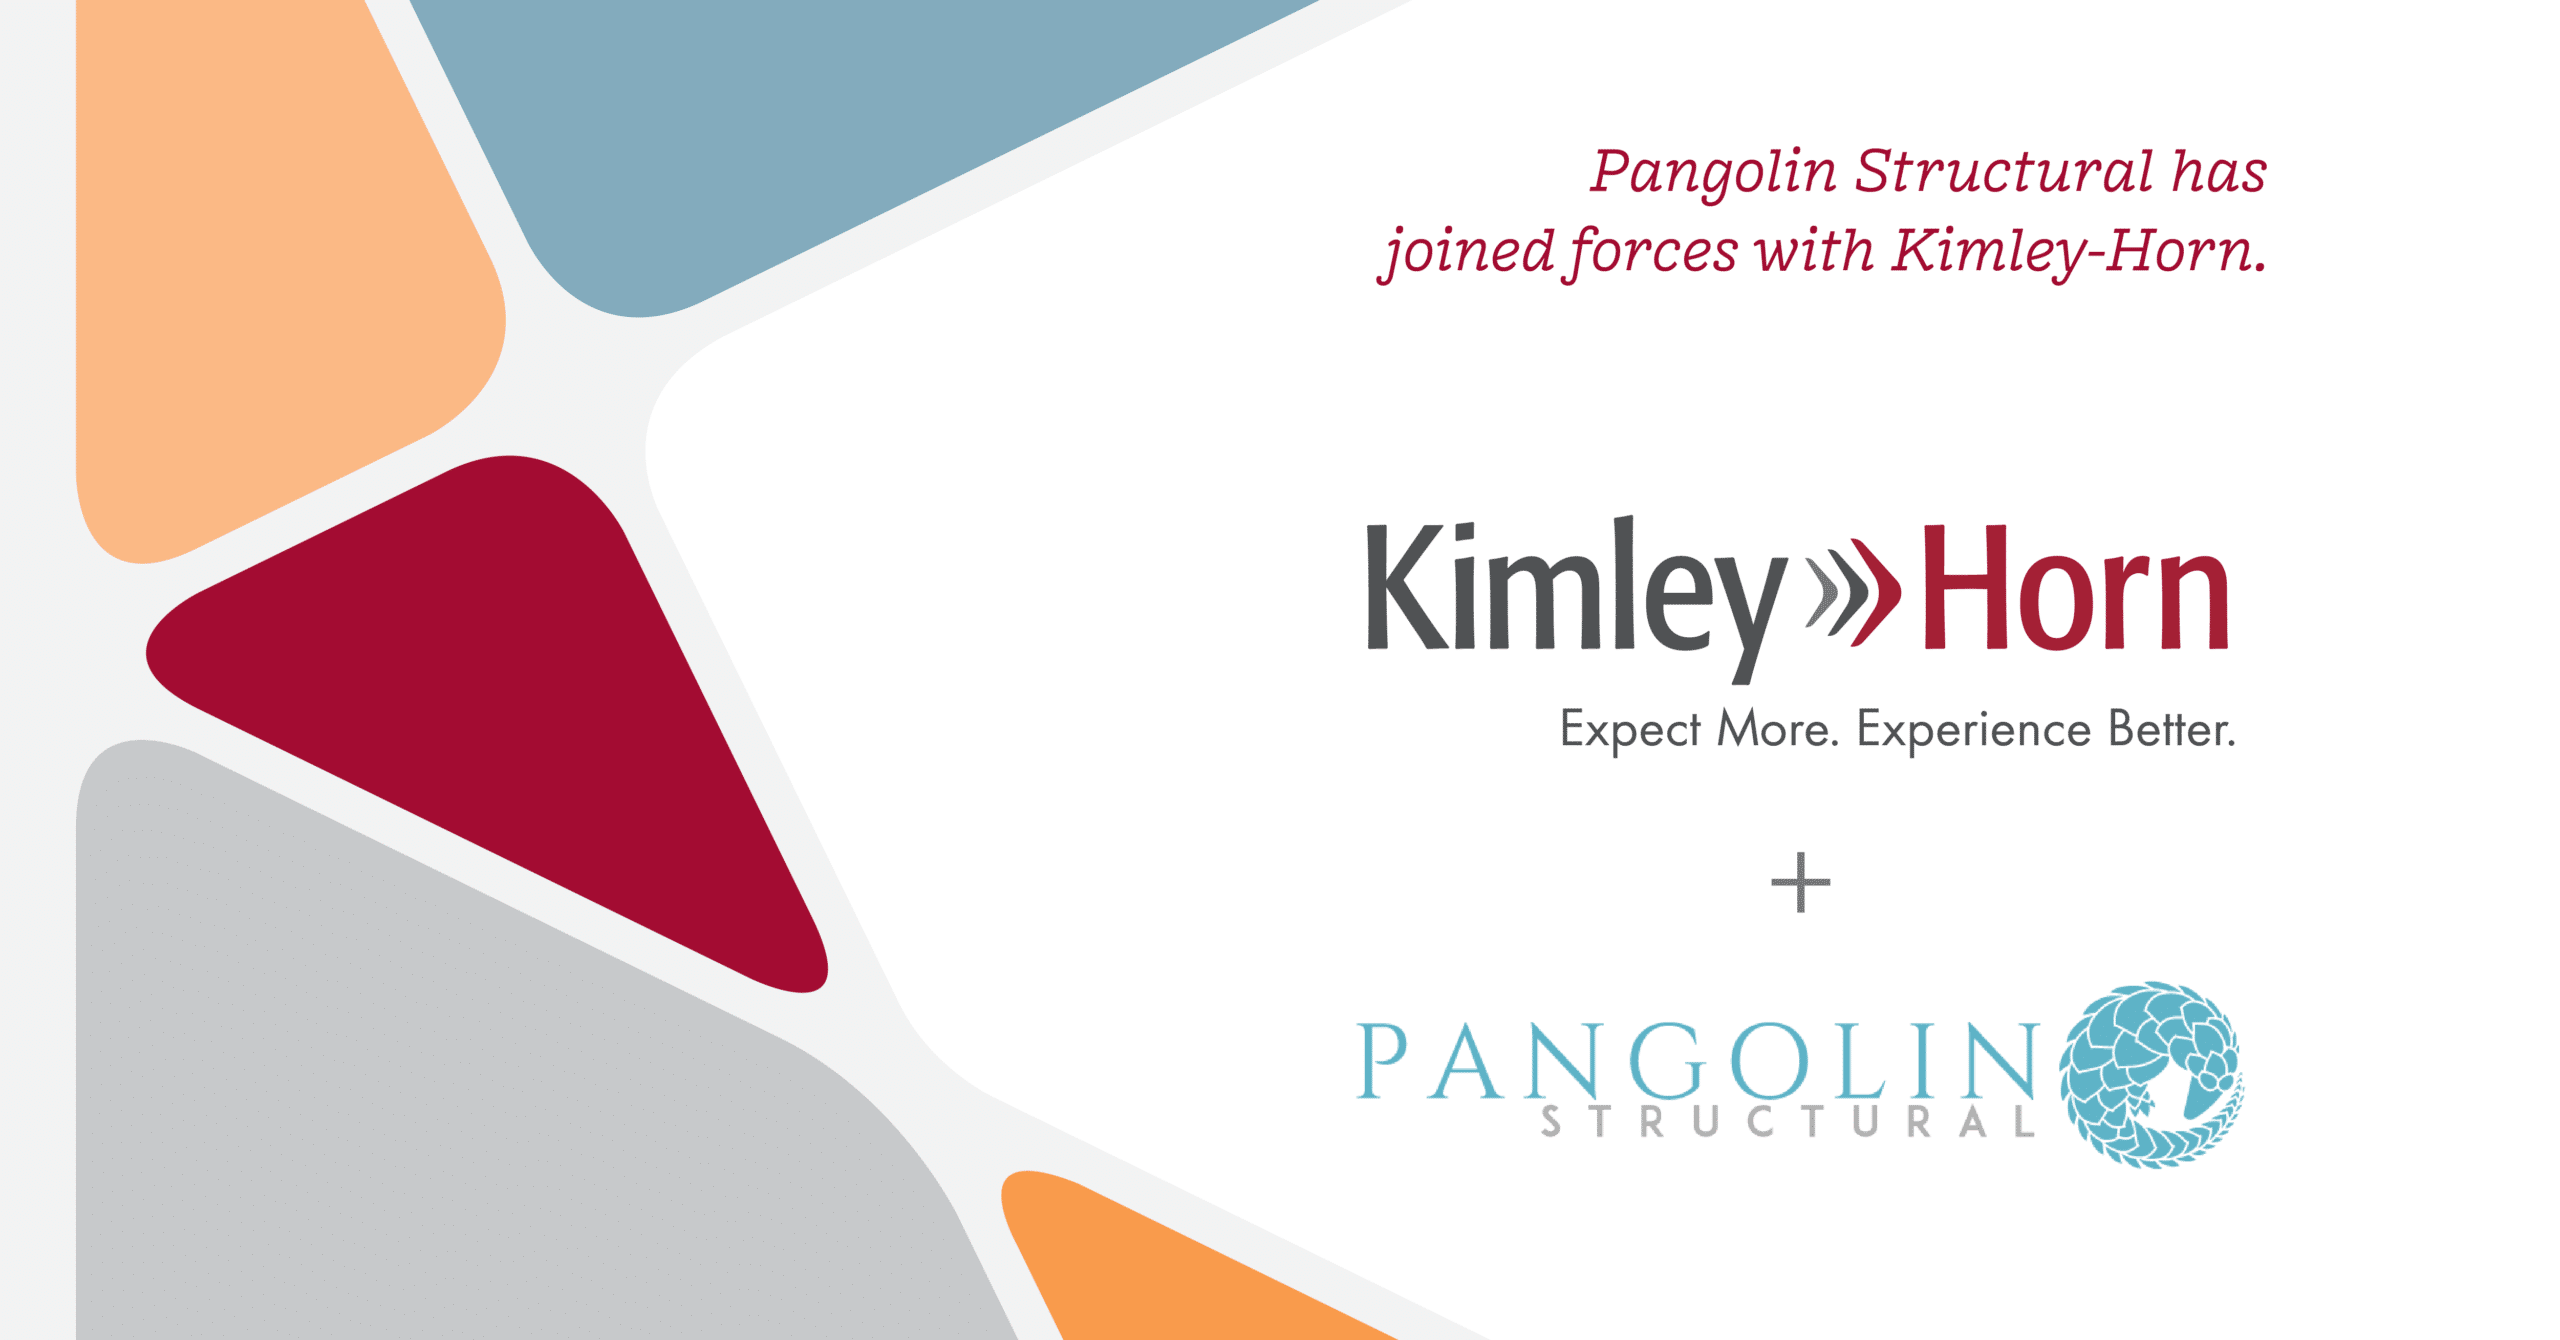 Pangolin Structural Joined forces with Kimley-Horn